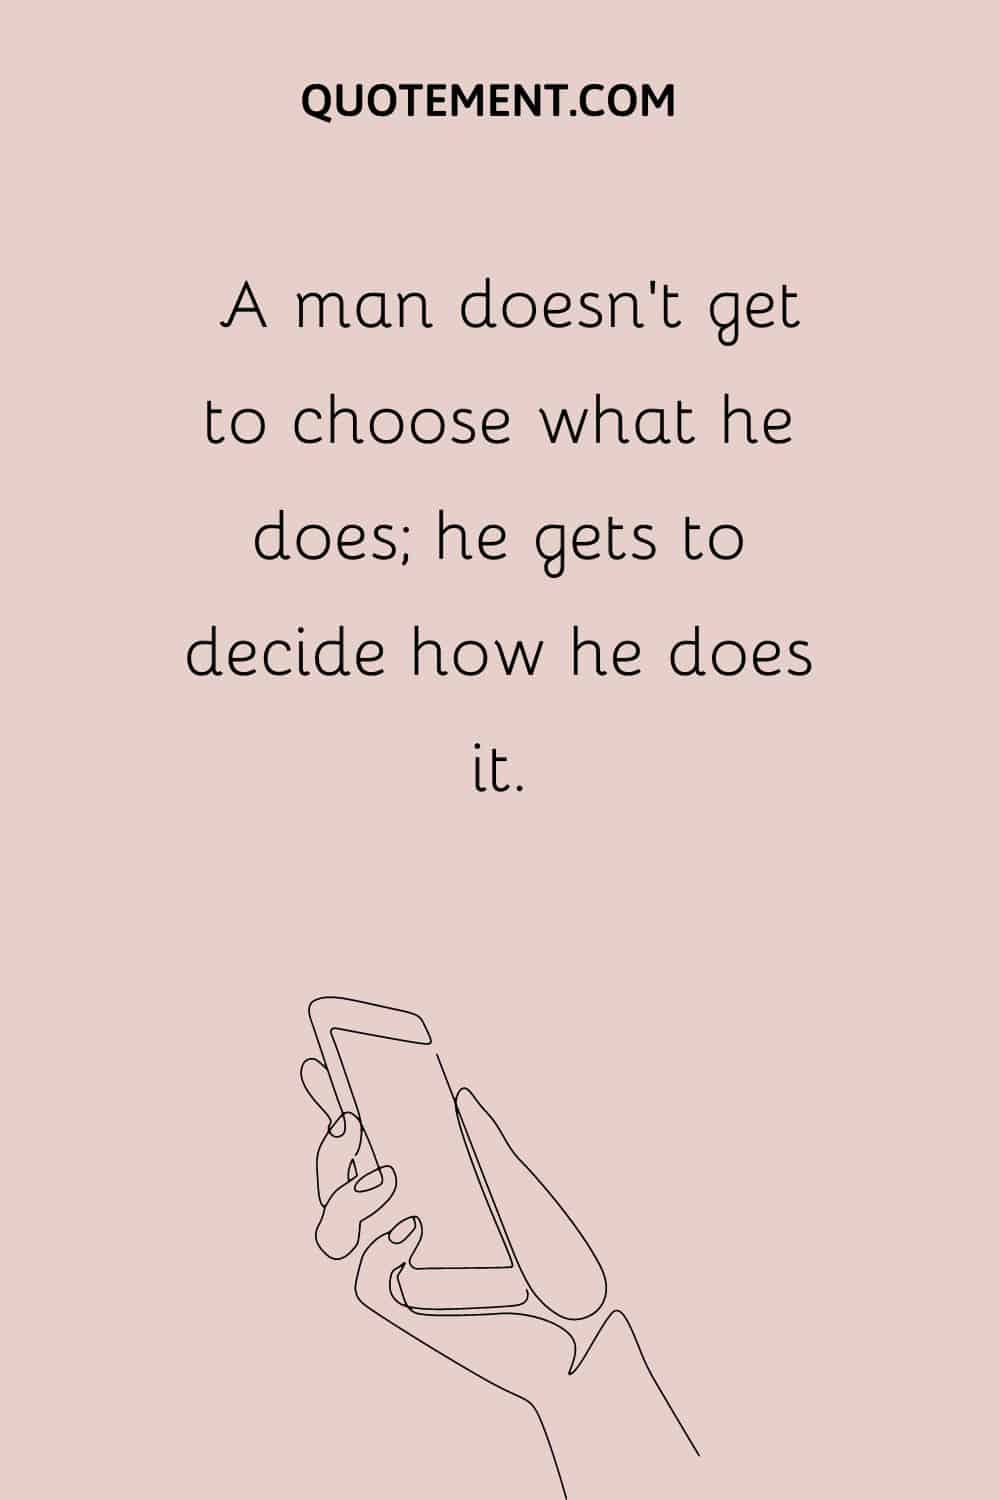 A man doesn’t get to choose what he does; he gets to decide how he does it